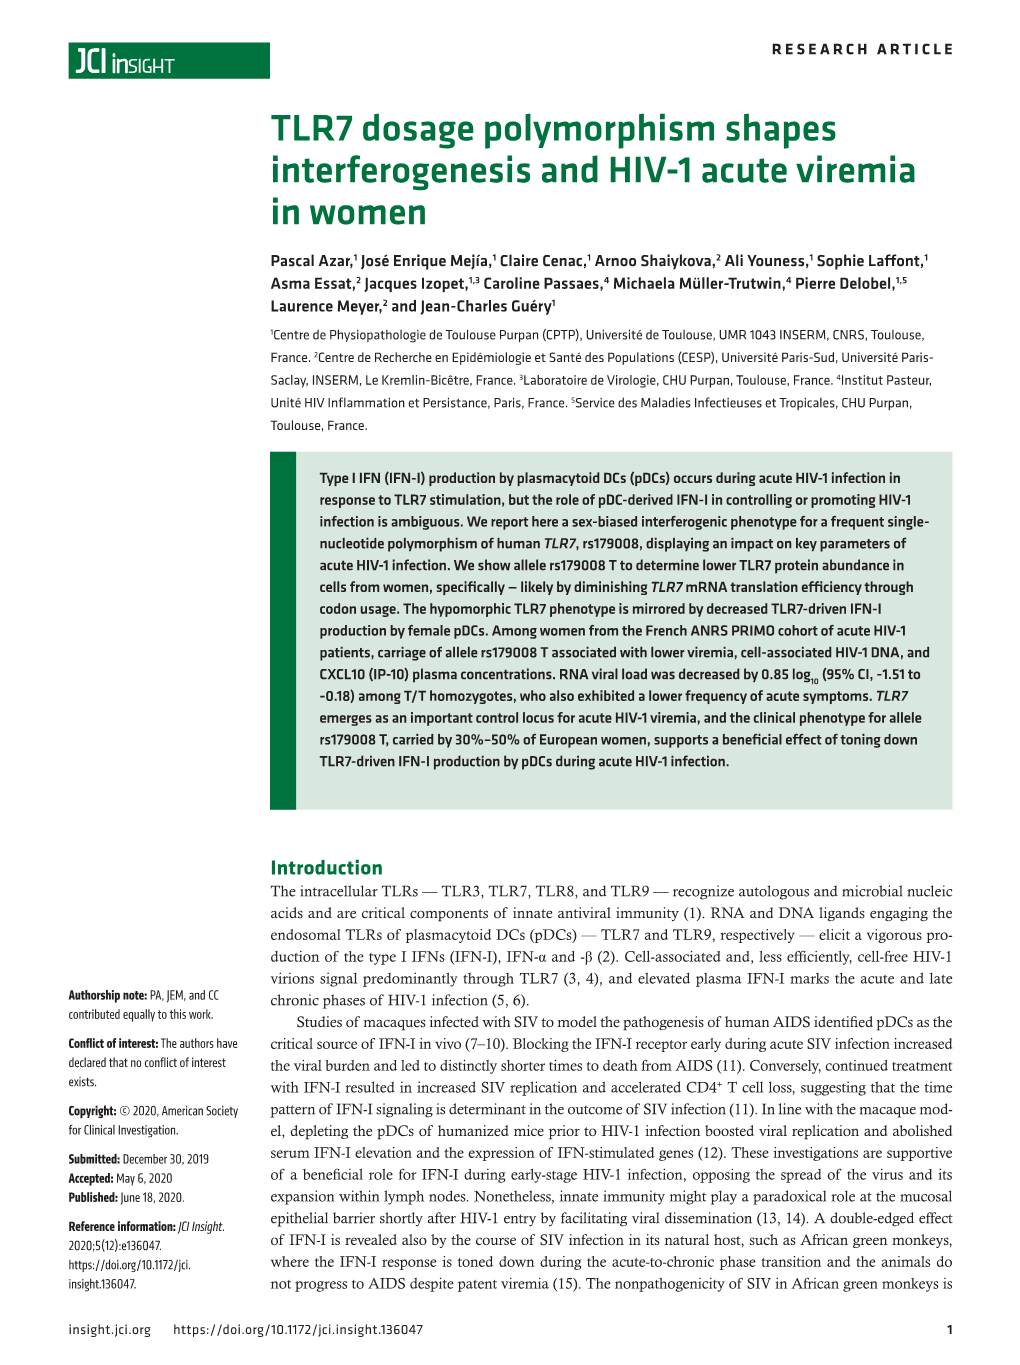 TLR7 Dosage Polymorphism Shapes Interferogenesis and HIV-1 Acute Viremia in Women